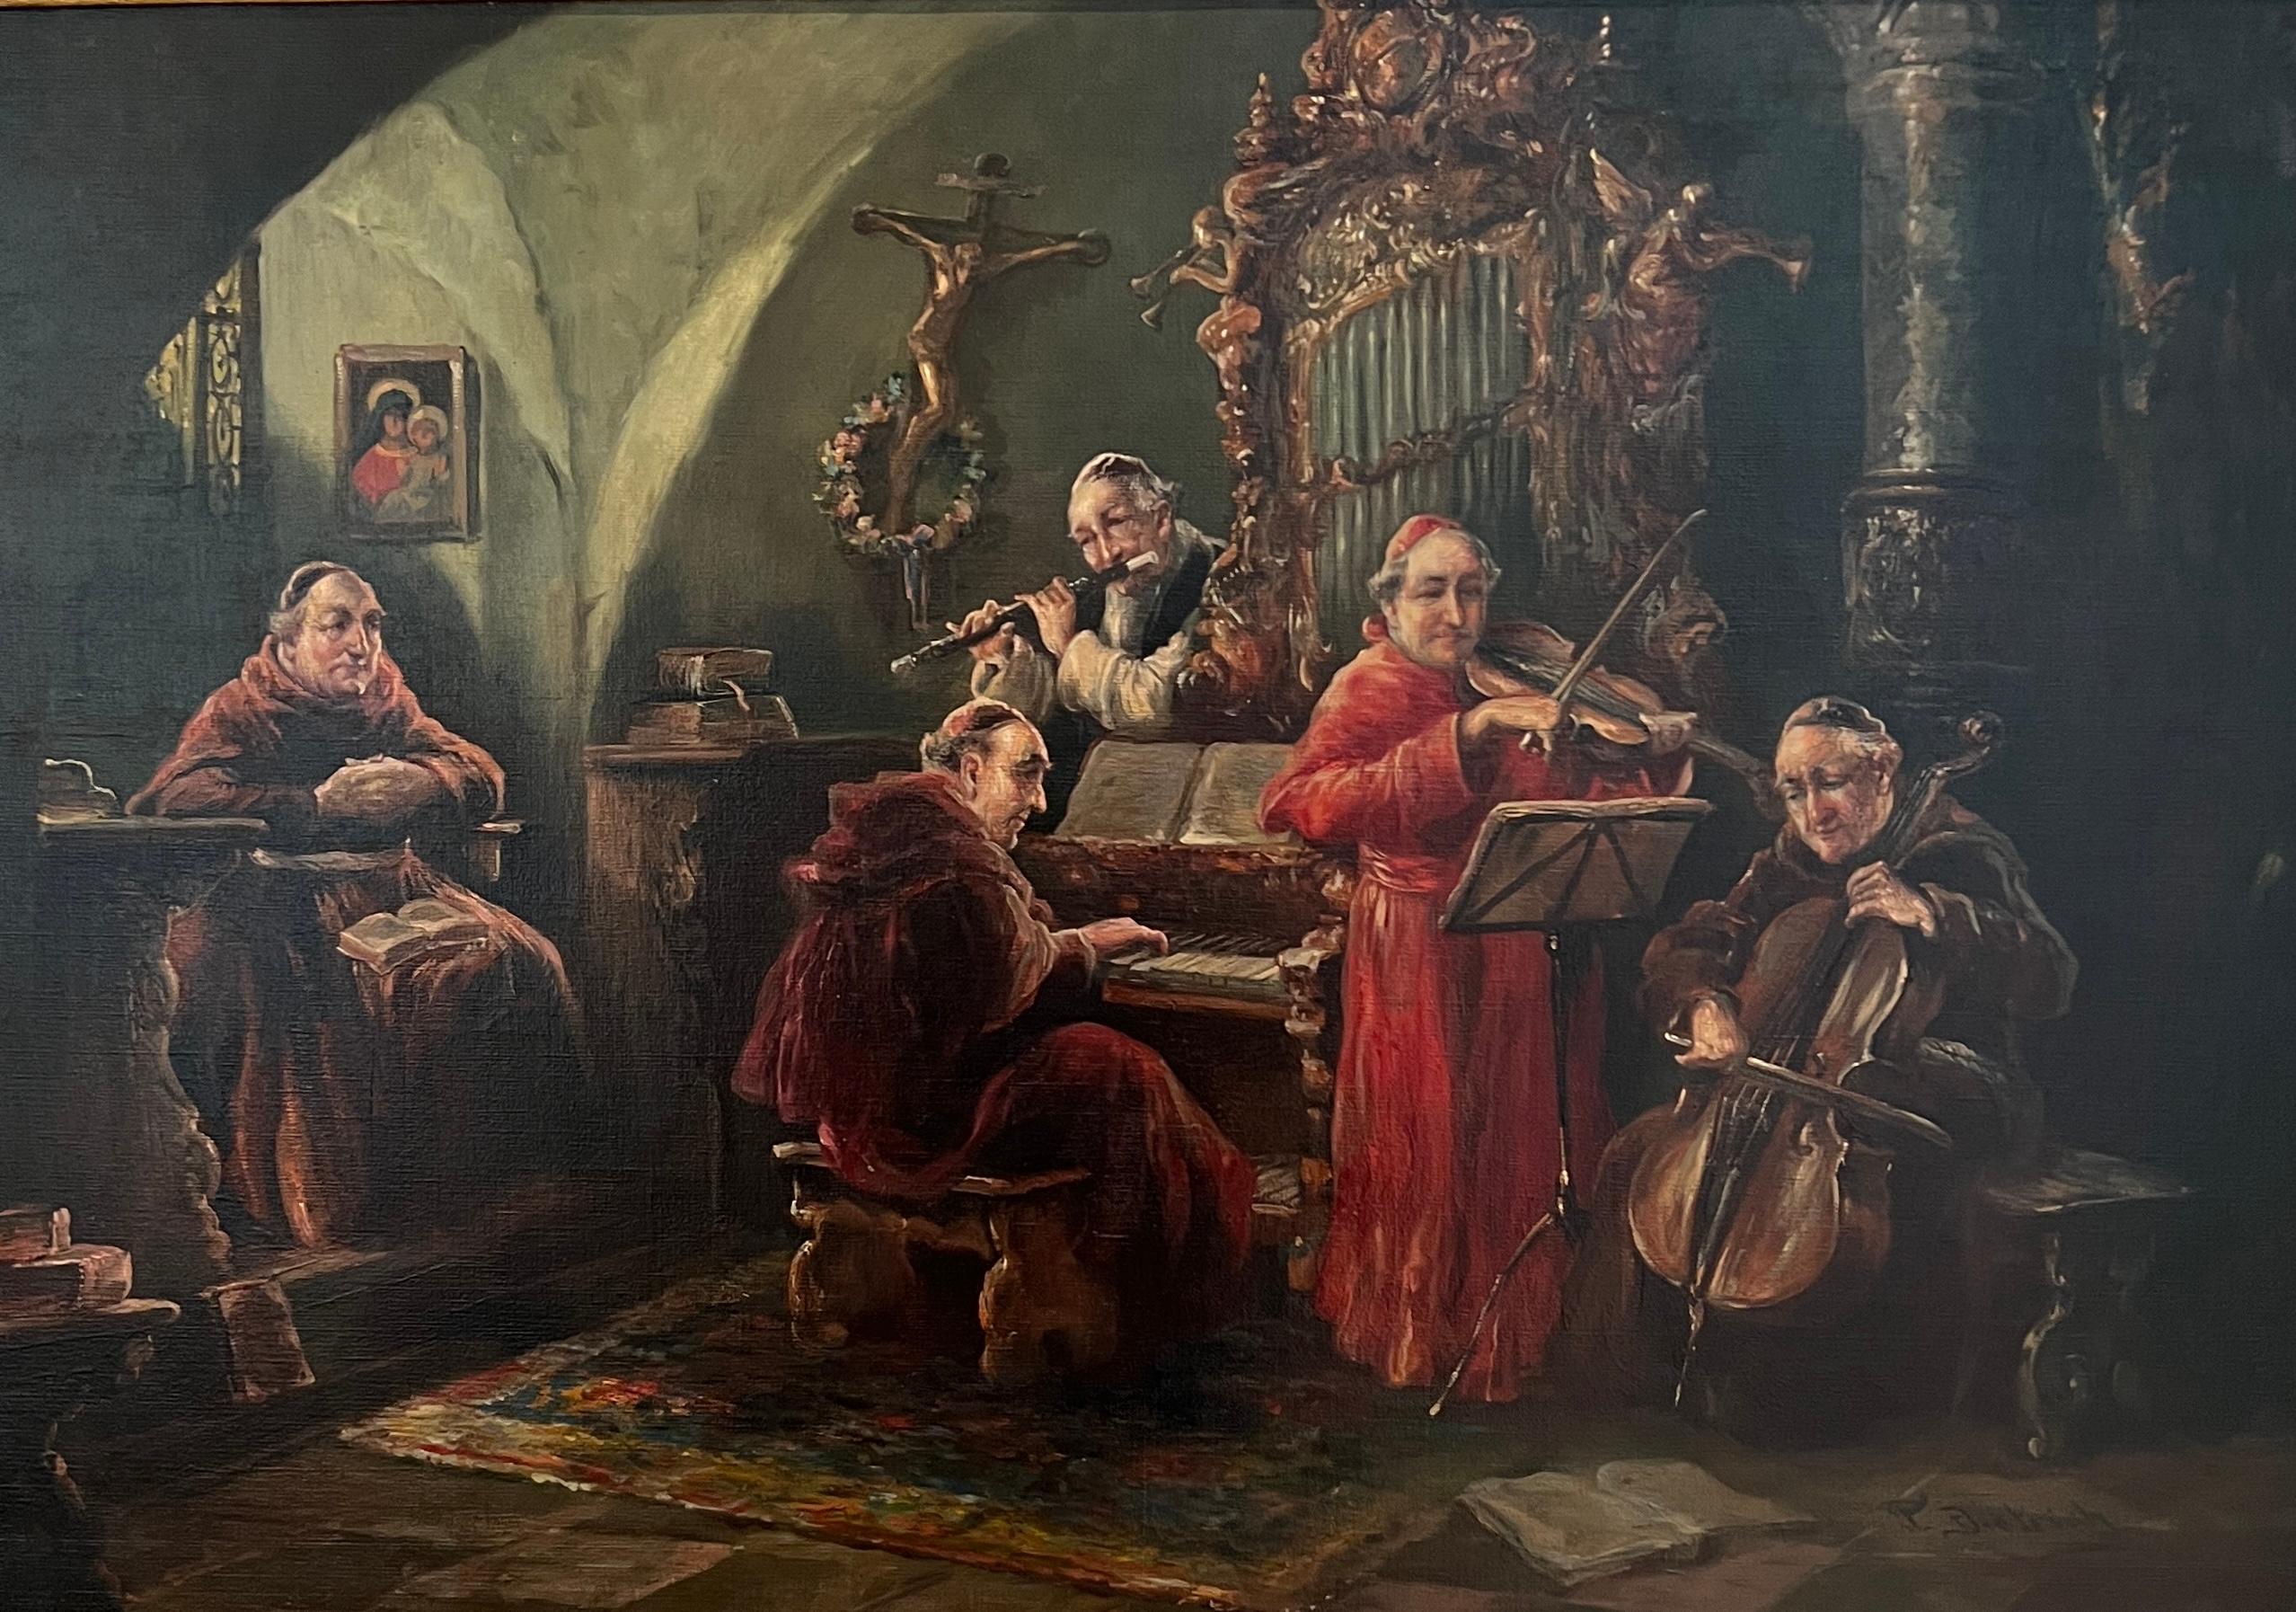 Concert of the monks